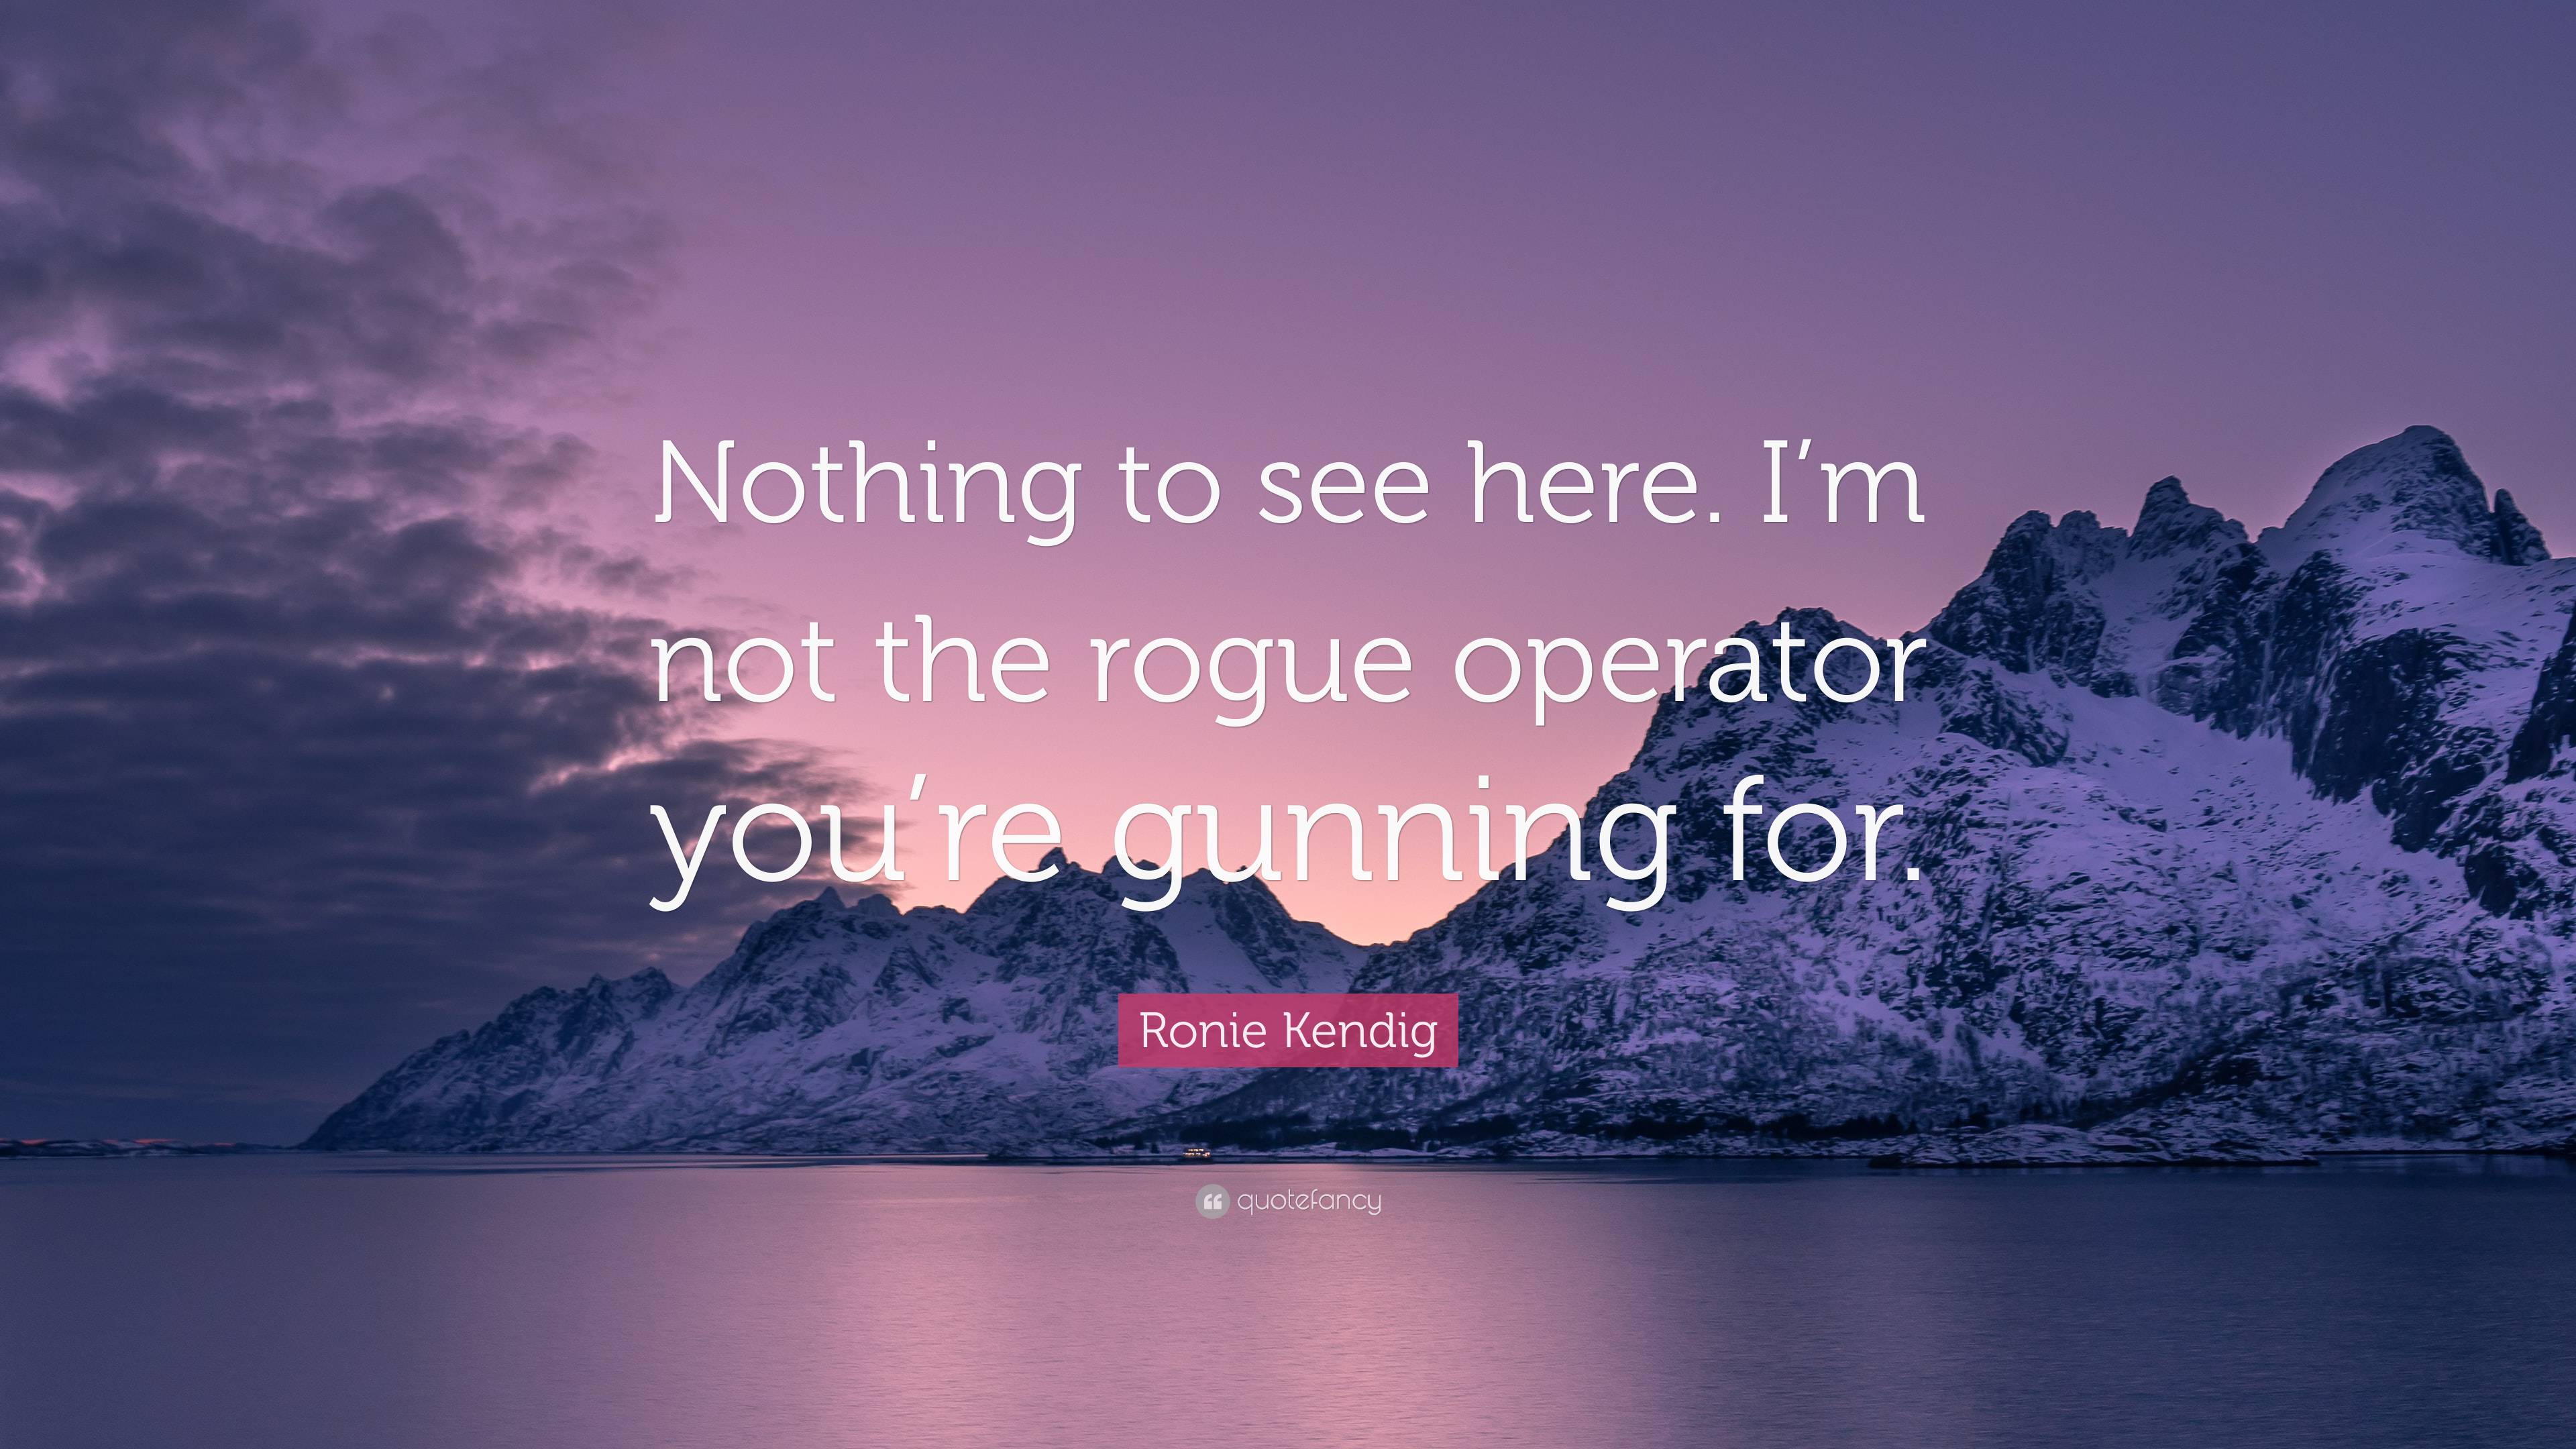 Ronie Kendig Quote “Nothing to see here. I’m not the rogue operator